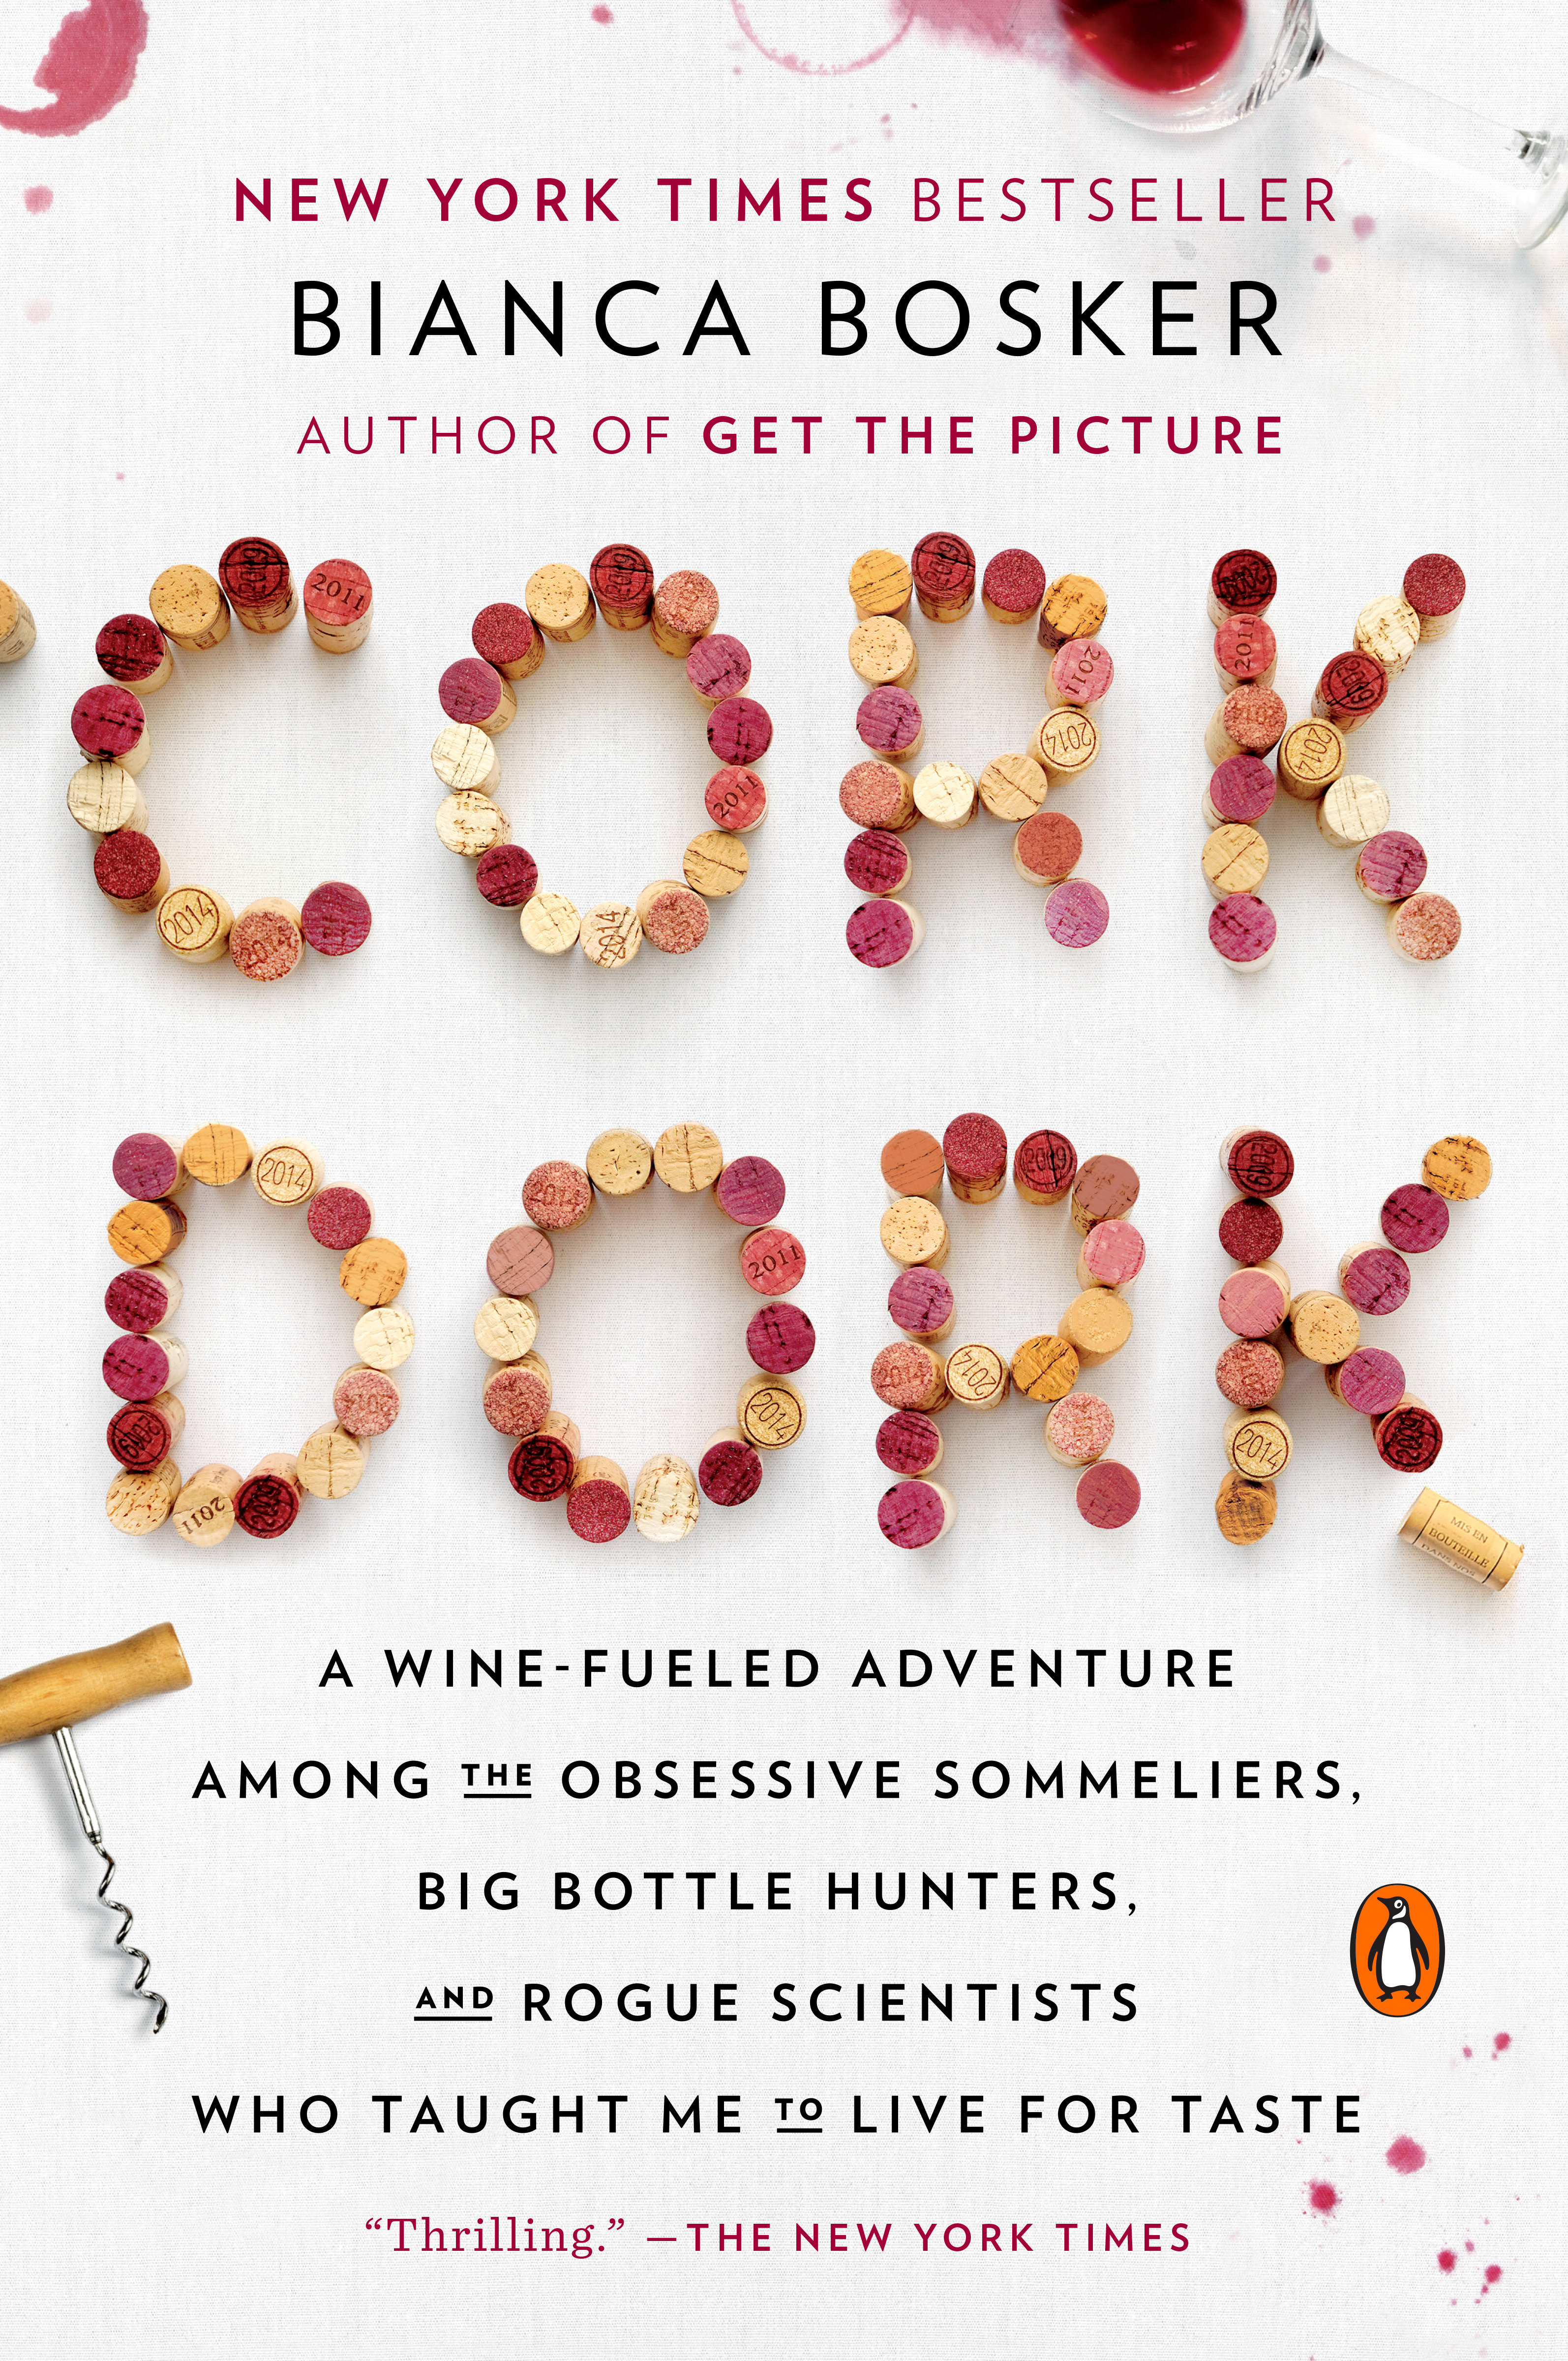 Cork dork a wine-fueled adventure among the obsessive sommeliers, big bottle hunters, and rogue scientists who taught me to live for taste cover image